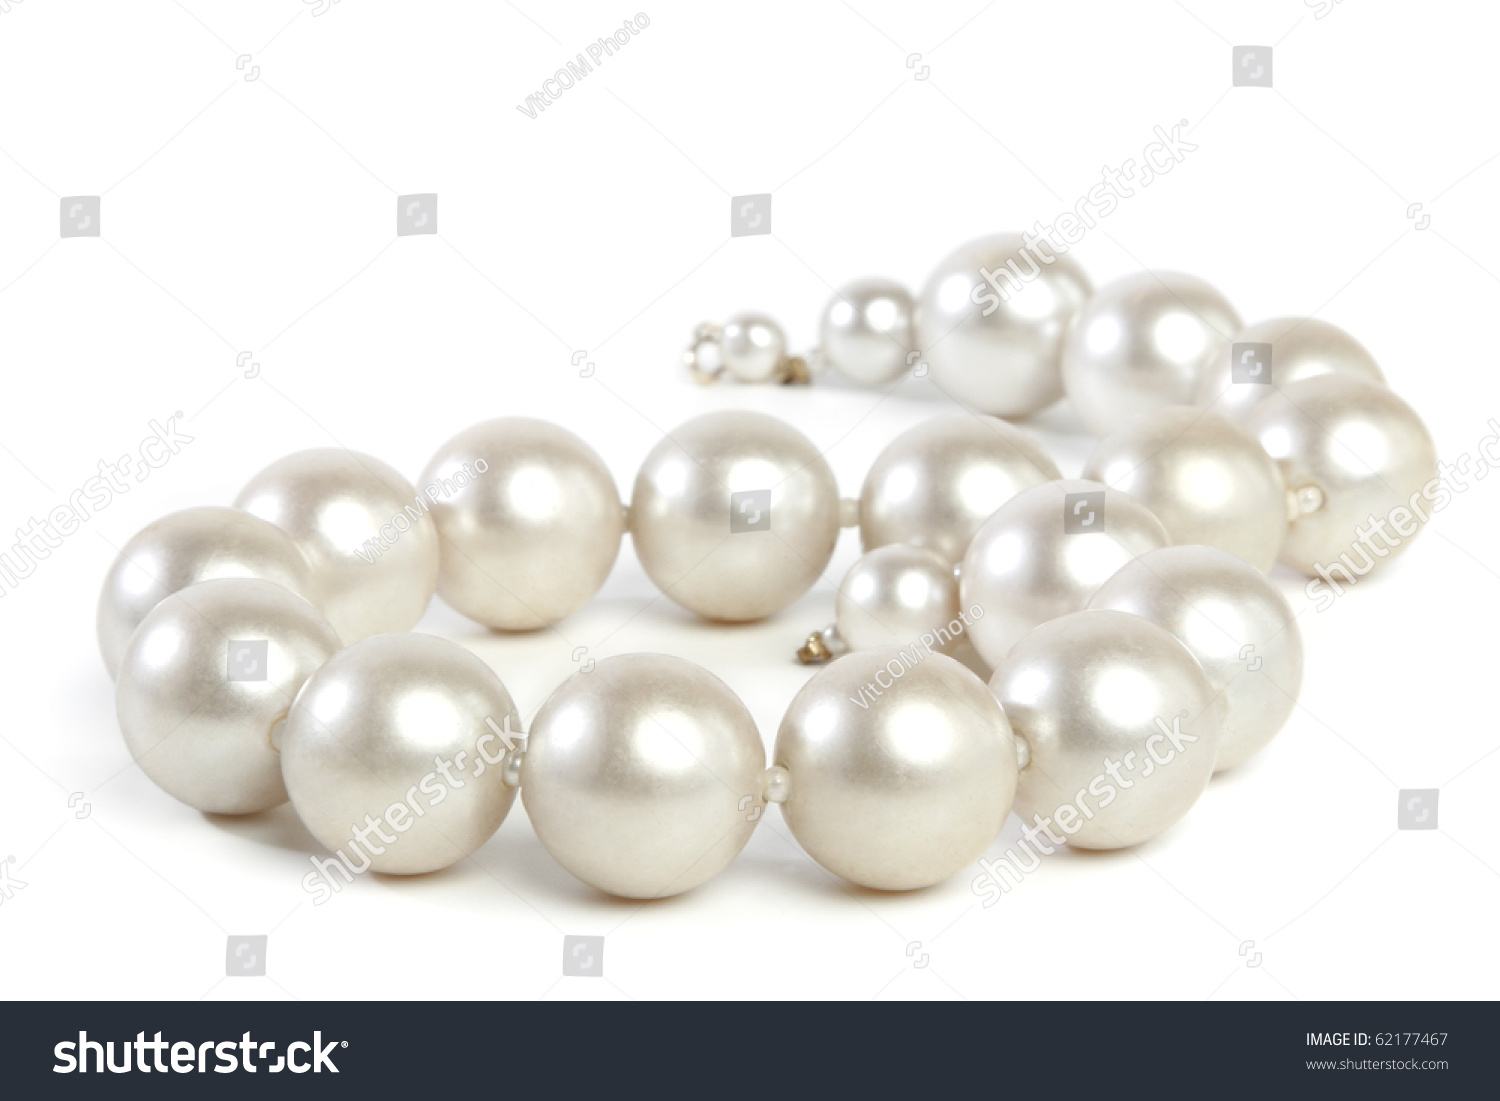 Beads from pearls, on a white background #62177467